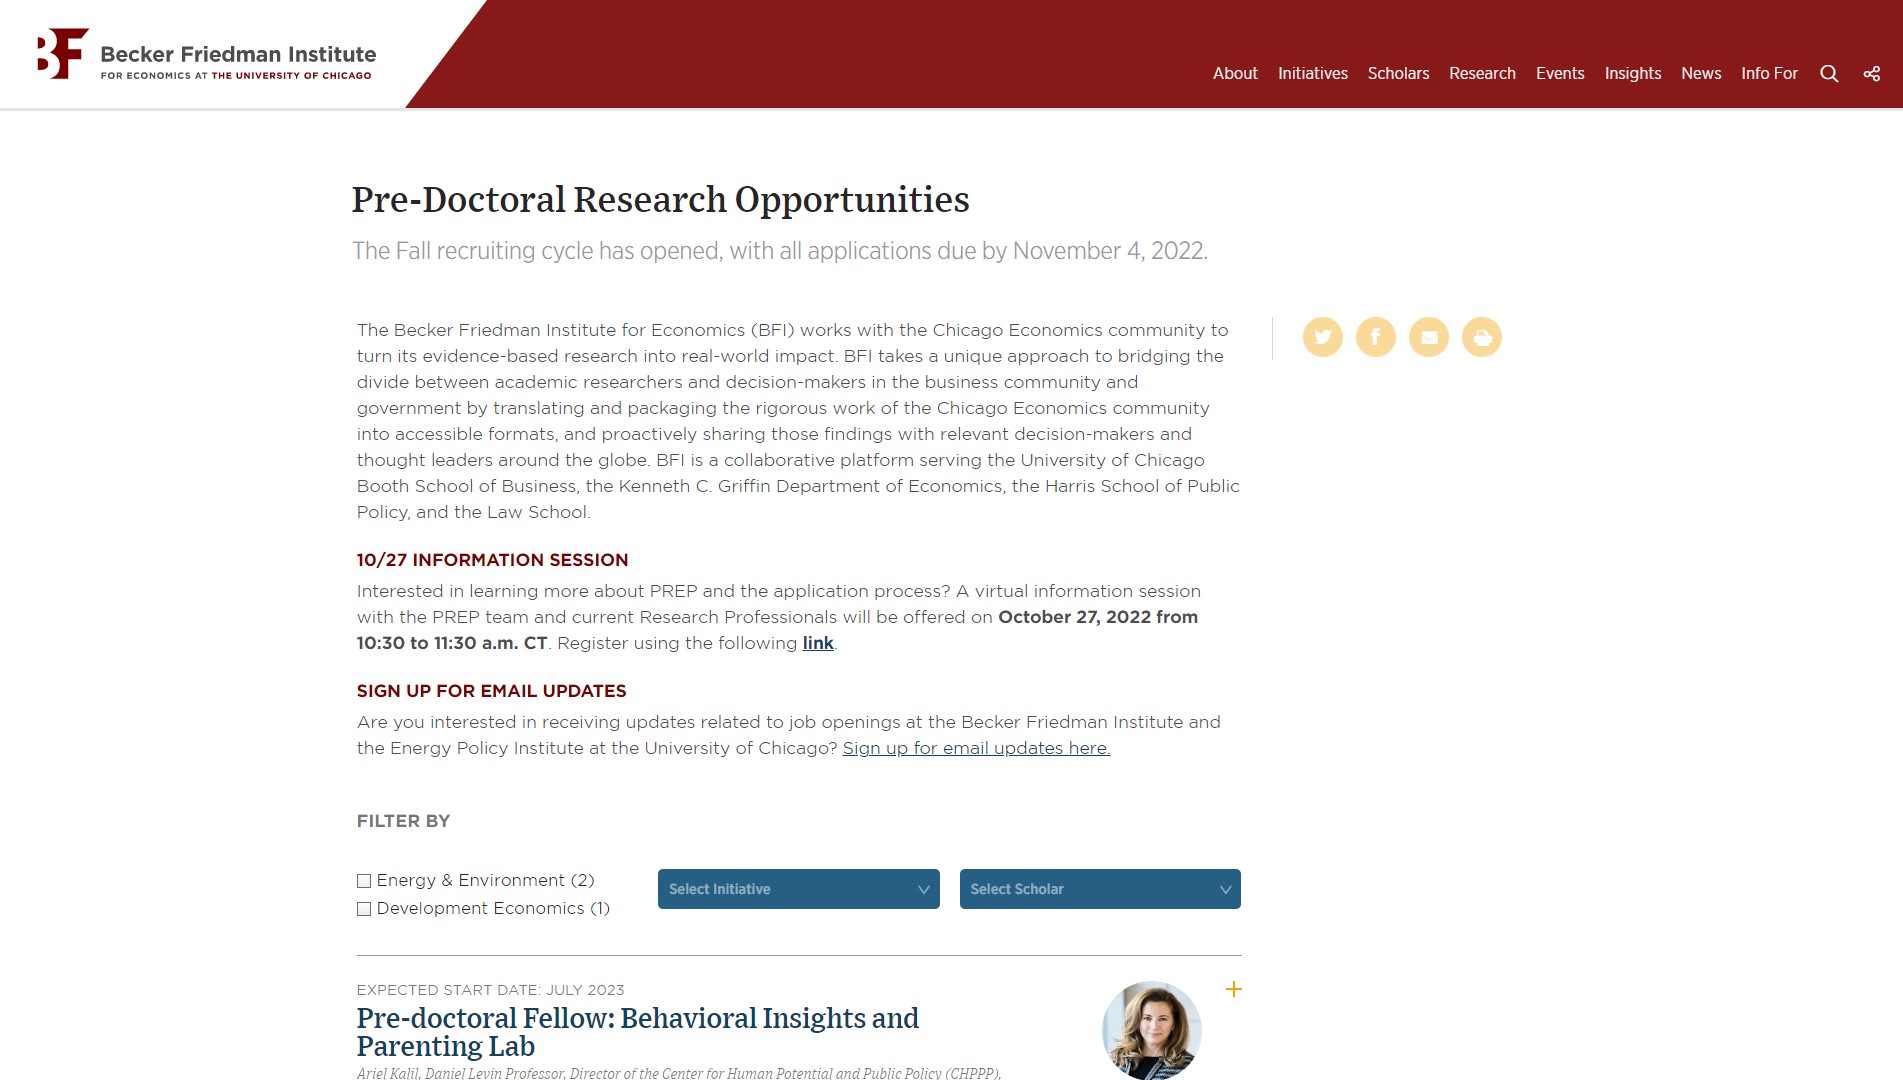 Full-time research assistant positions at the University of Chicago